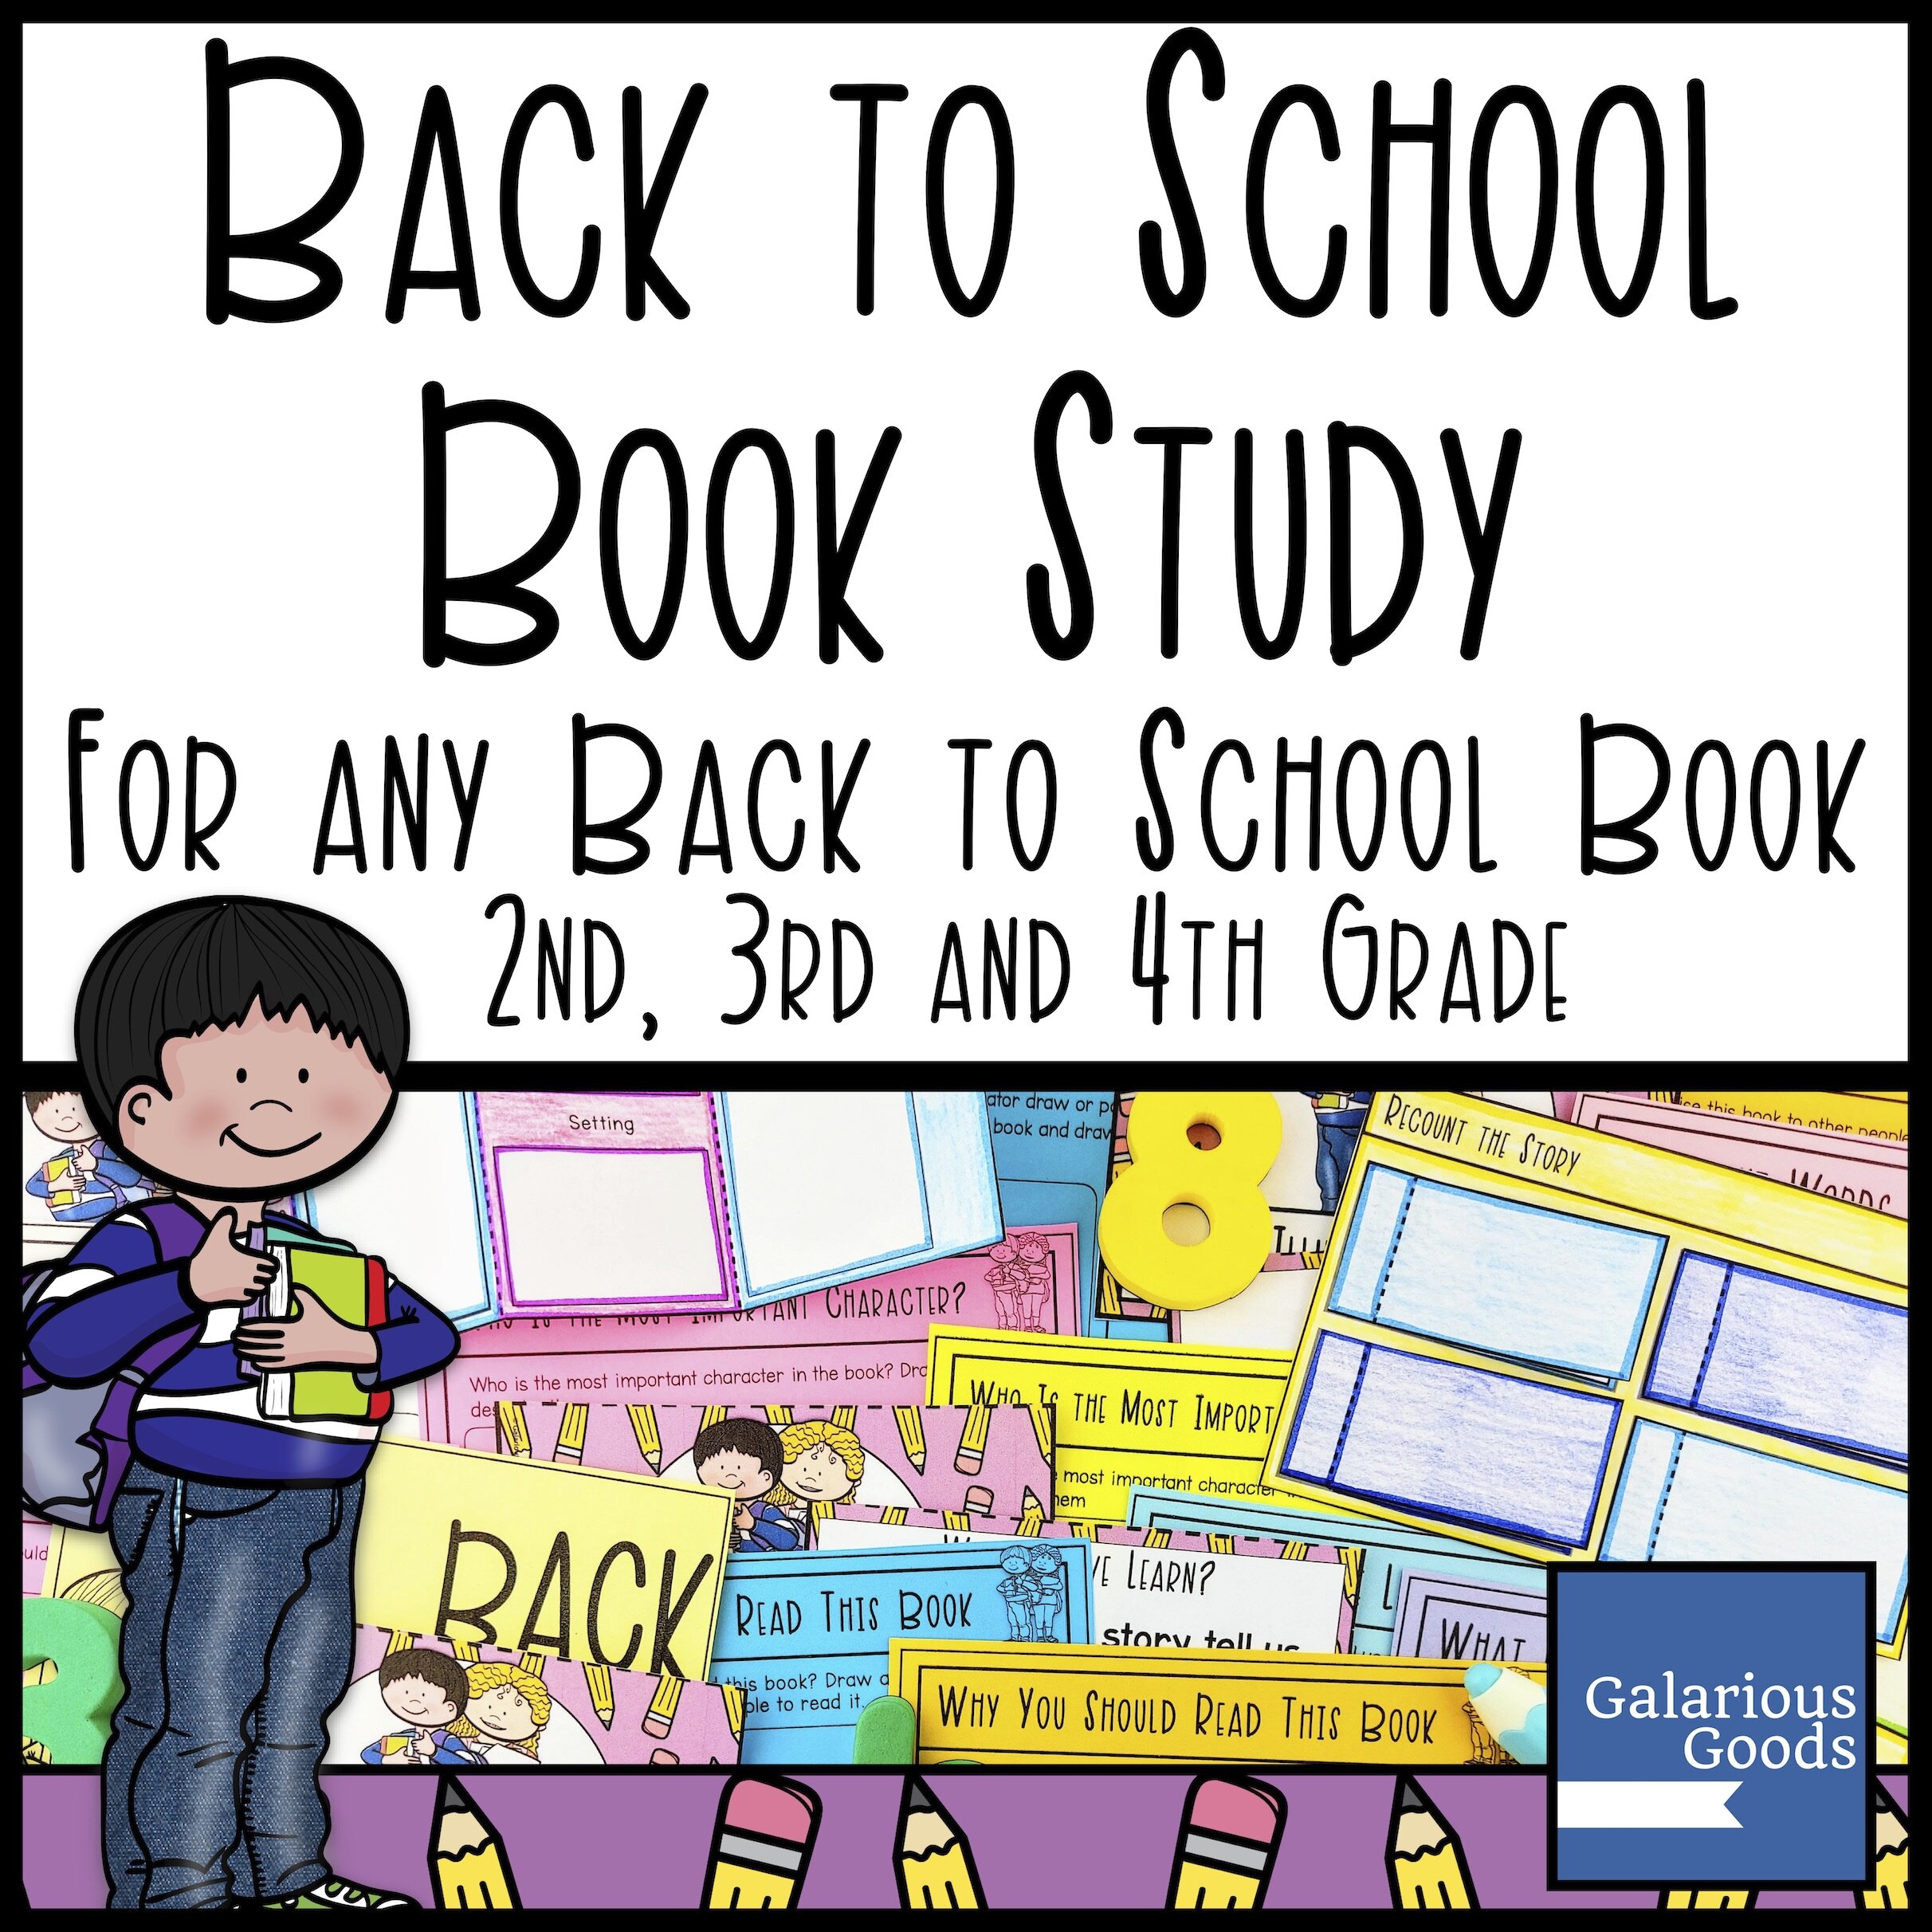 cover back to school book study 234.jpg